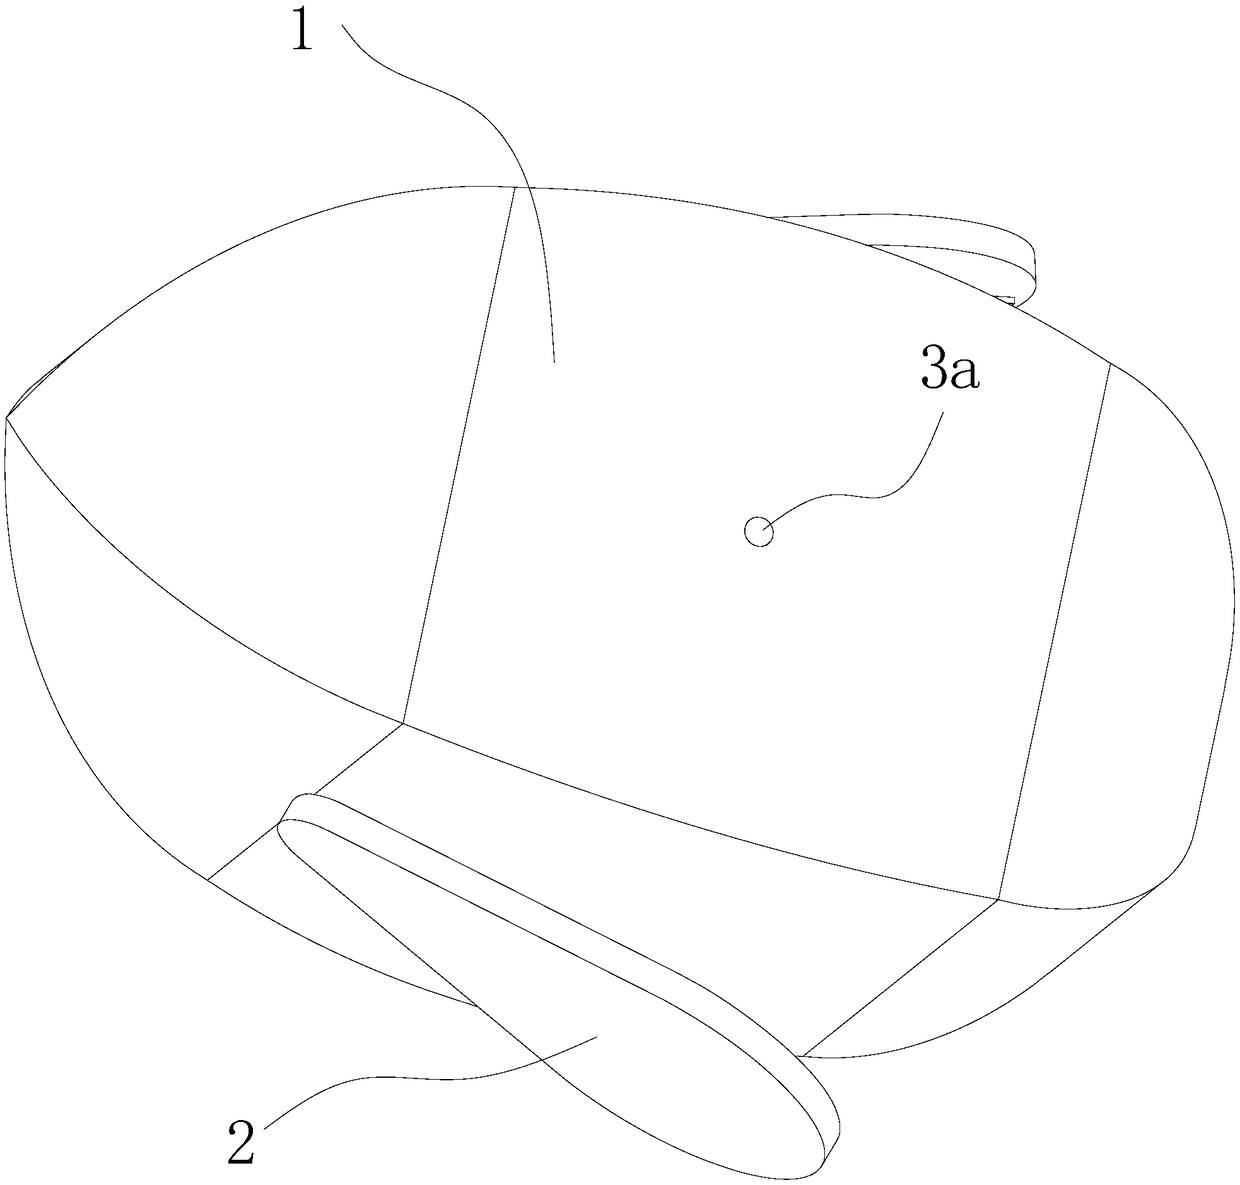 A soft-body robotic fish driven by shape memory alloy